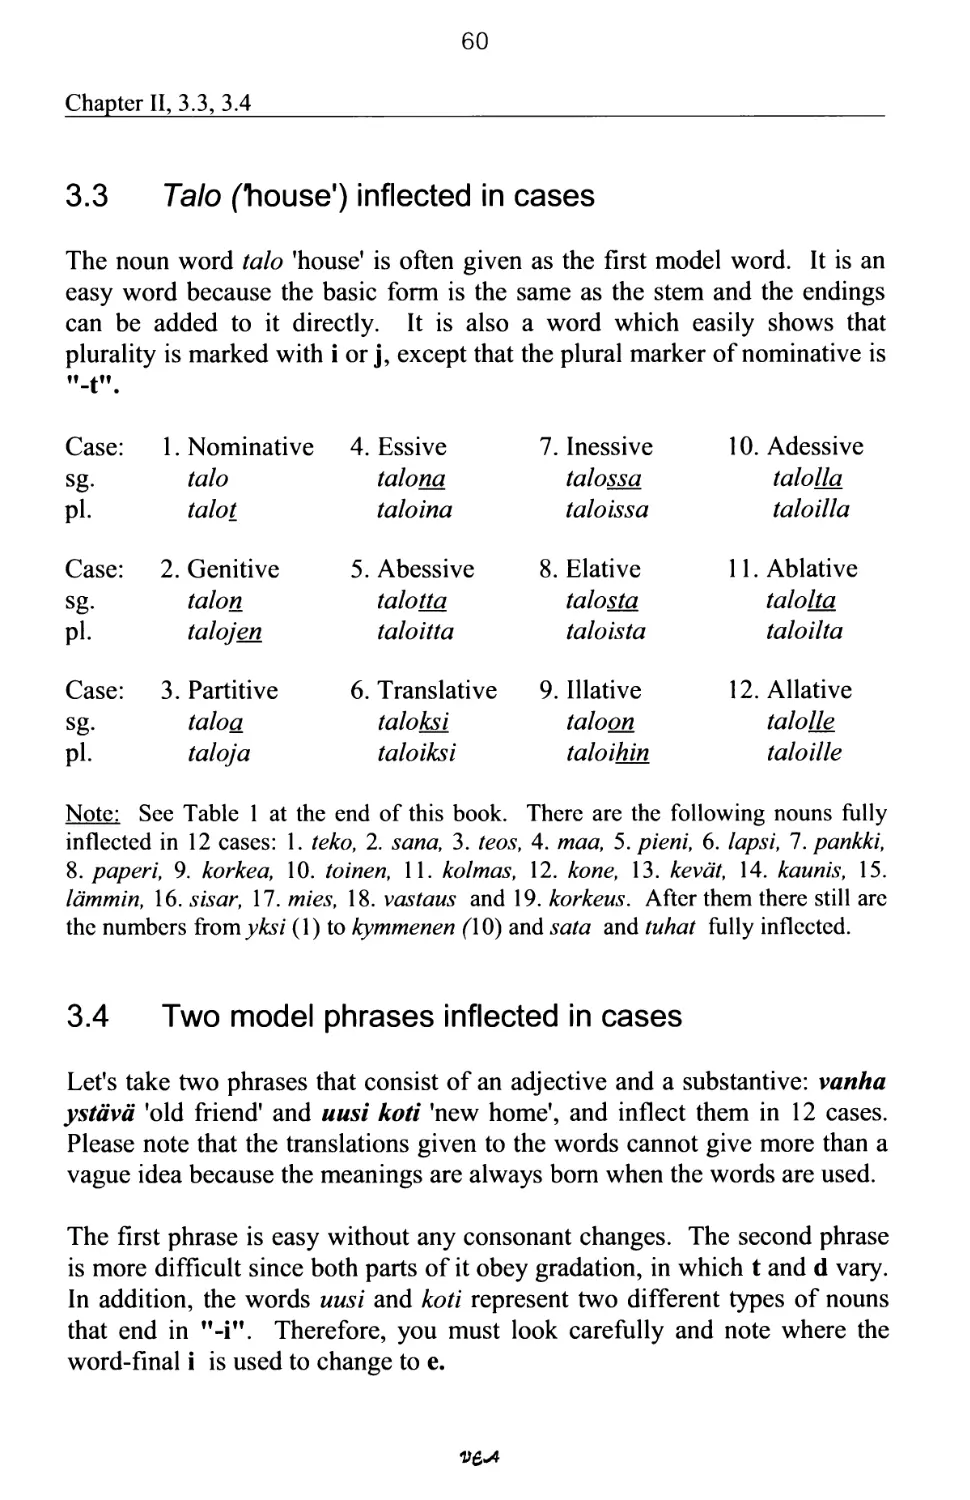 3.4 Two model phrases inflected in cases